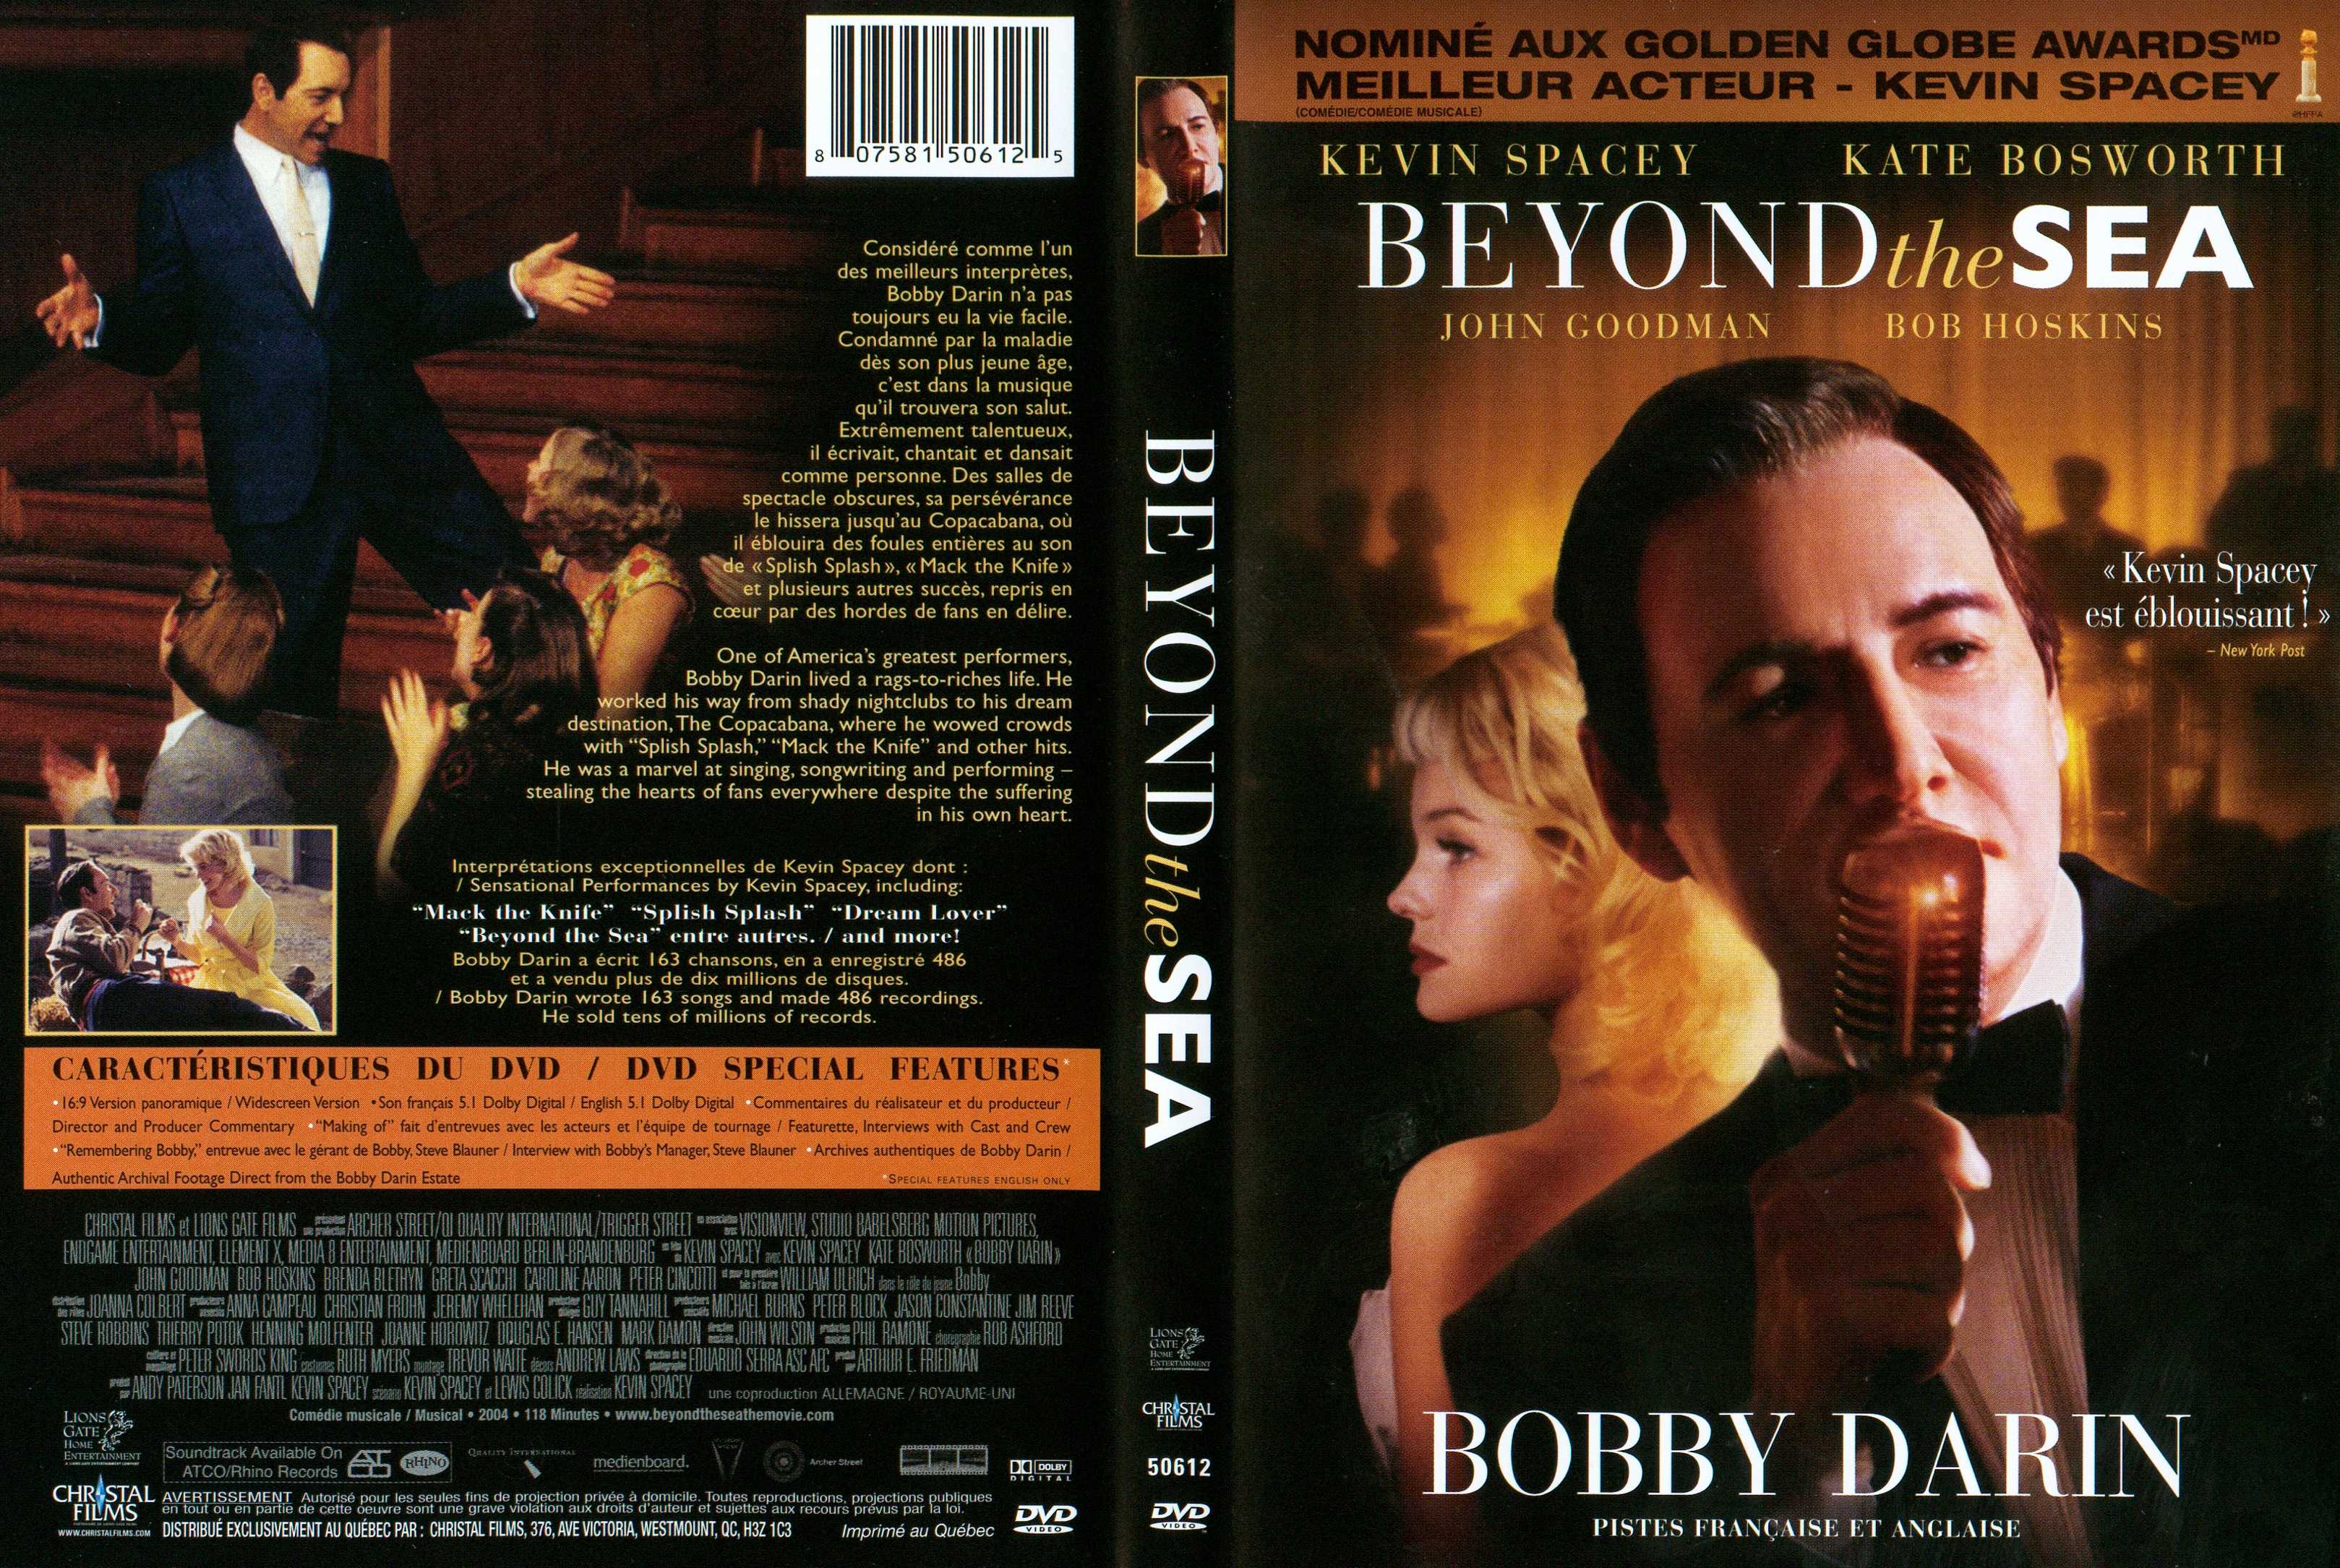 Jaquette DVD Beyond the sea